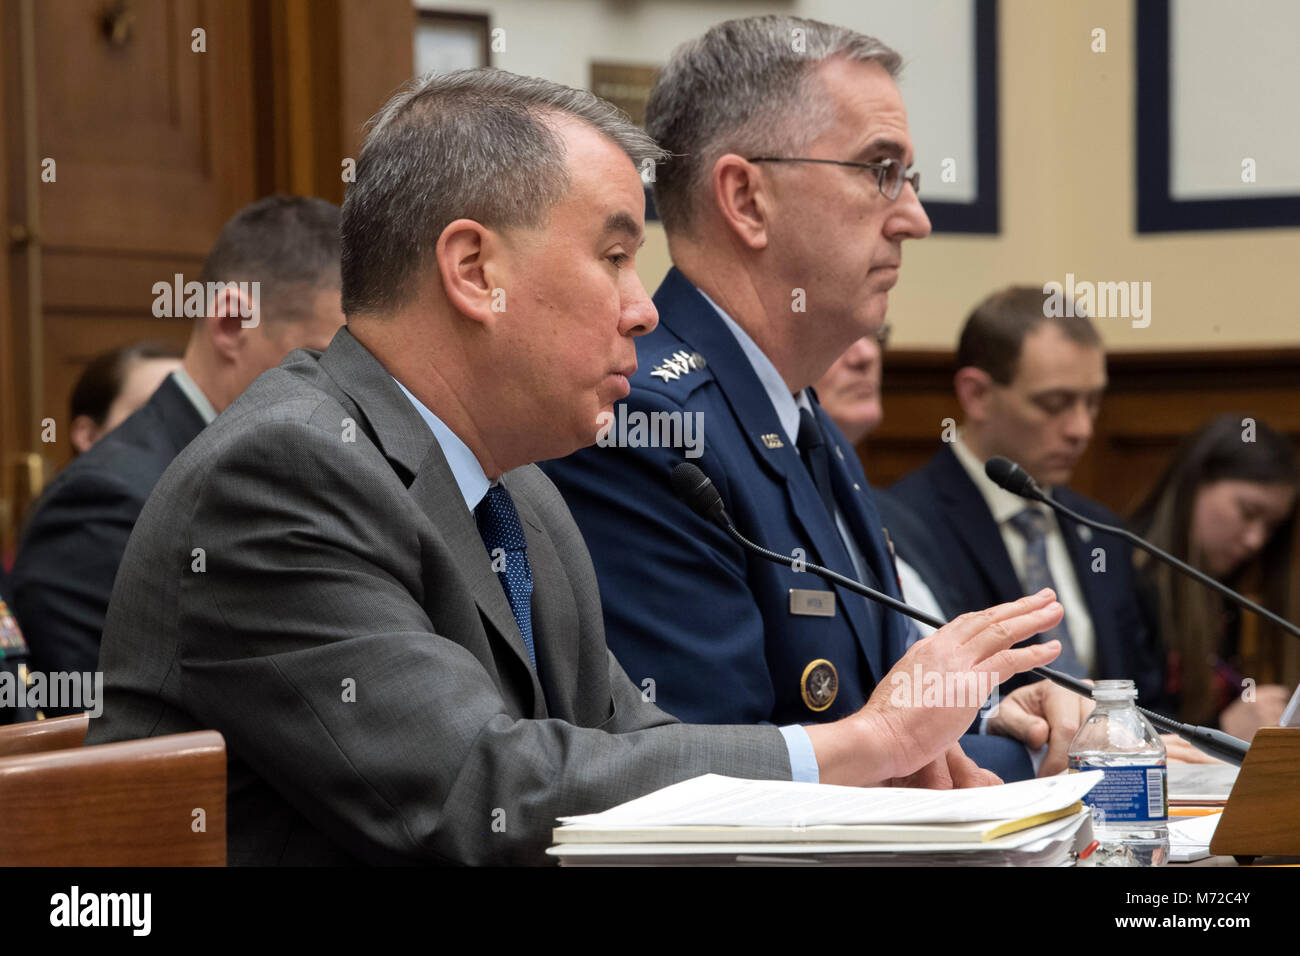 Under Secretary of Defense for Policy John C. Rood, and Air Force Gen. John E. Hyten, commander of U.S. Strategic Command, testify before the House Armed Services Committee in Washington, D.C. March 7, 2018. (DoD photo by EJ Hersom) Stock Photo